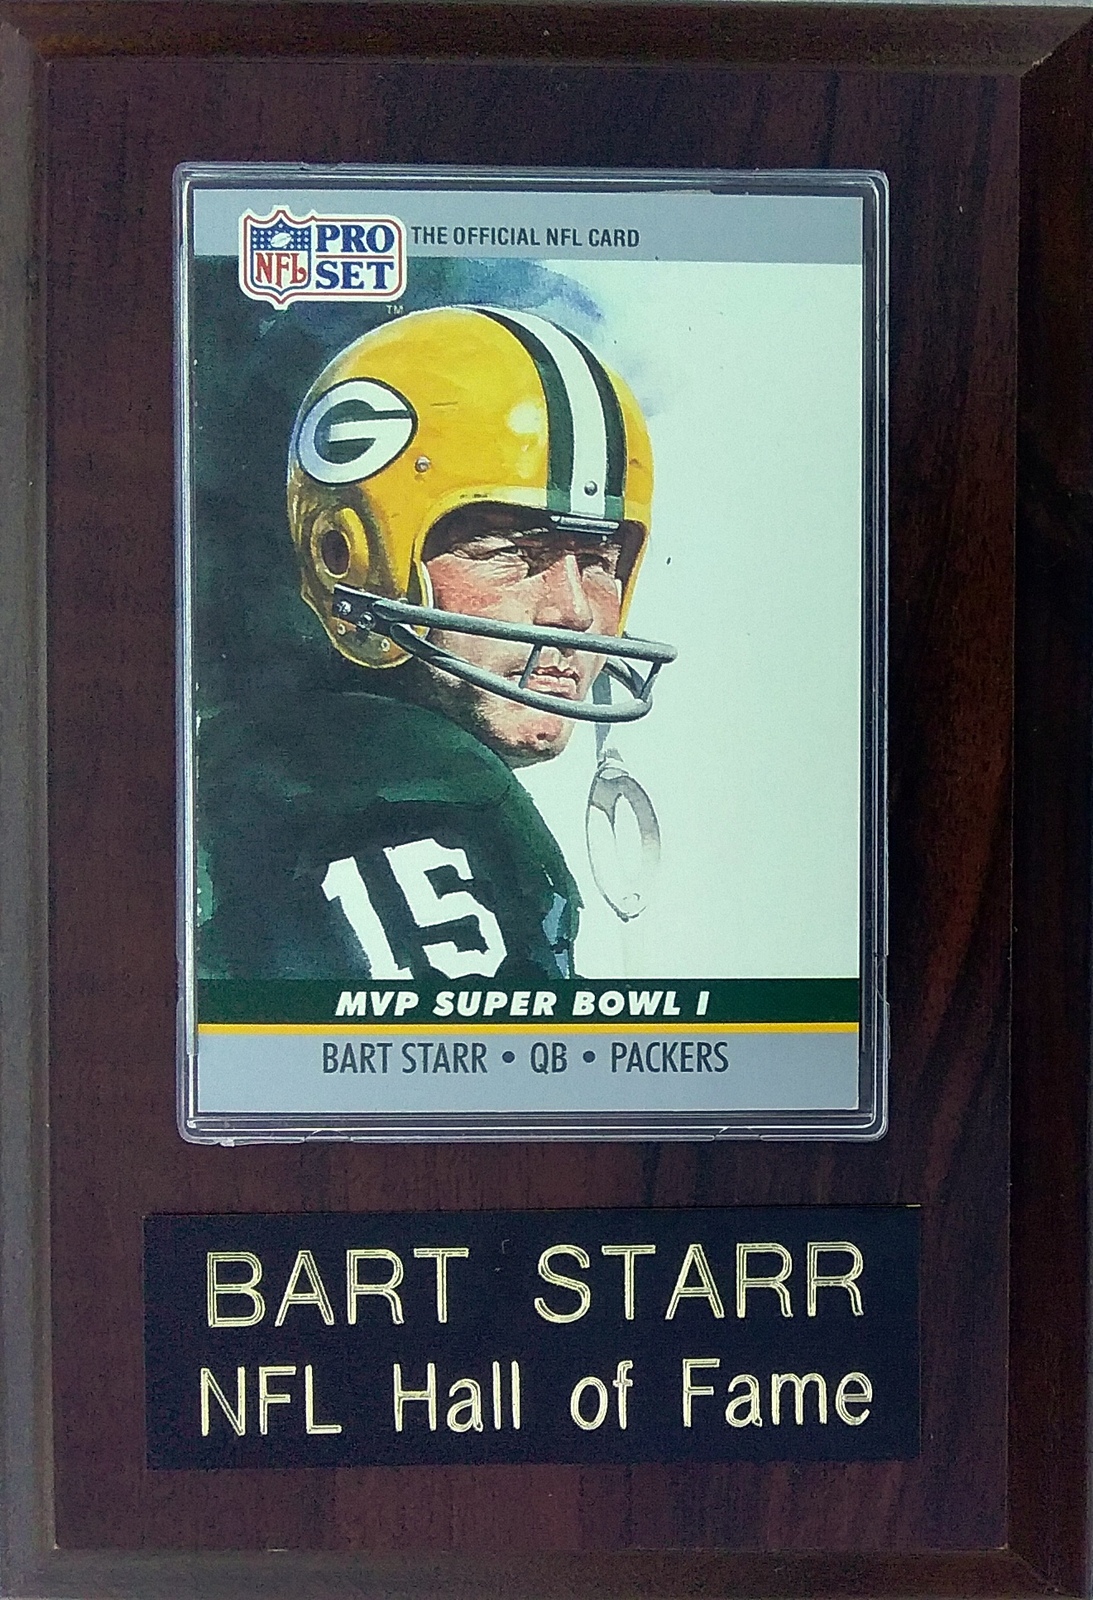 Bart Starr Green Bay Packers Super Bowl I MVP Card Player Plaque - $9.95